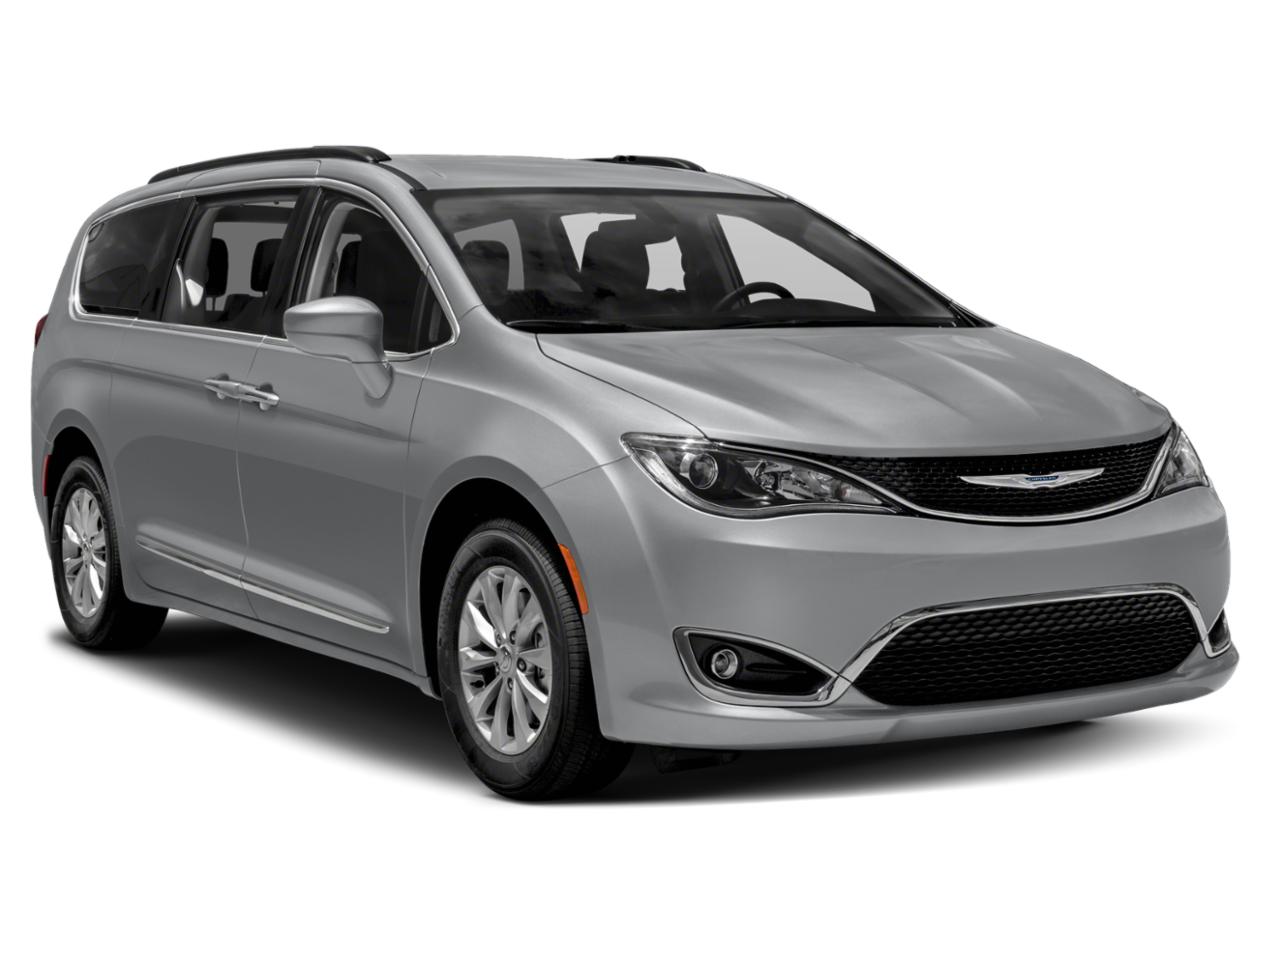 Used 2018 Chrysler Pacifica For Sale Hudson MA